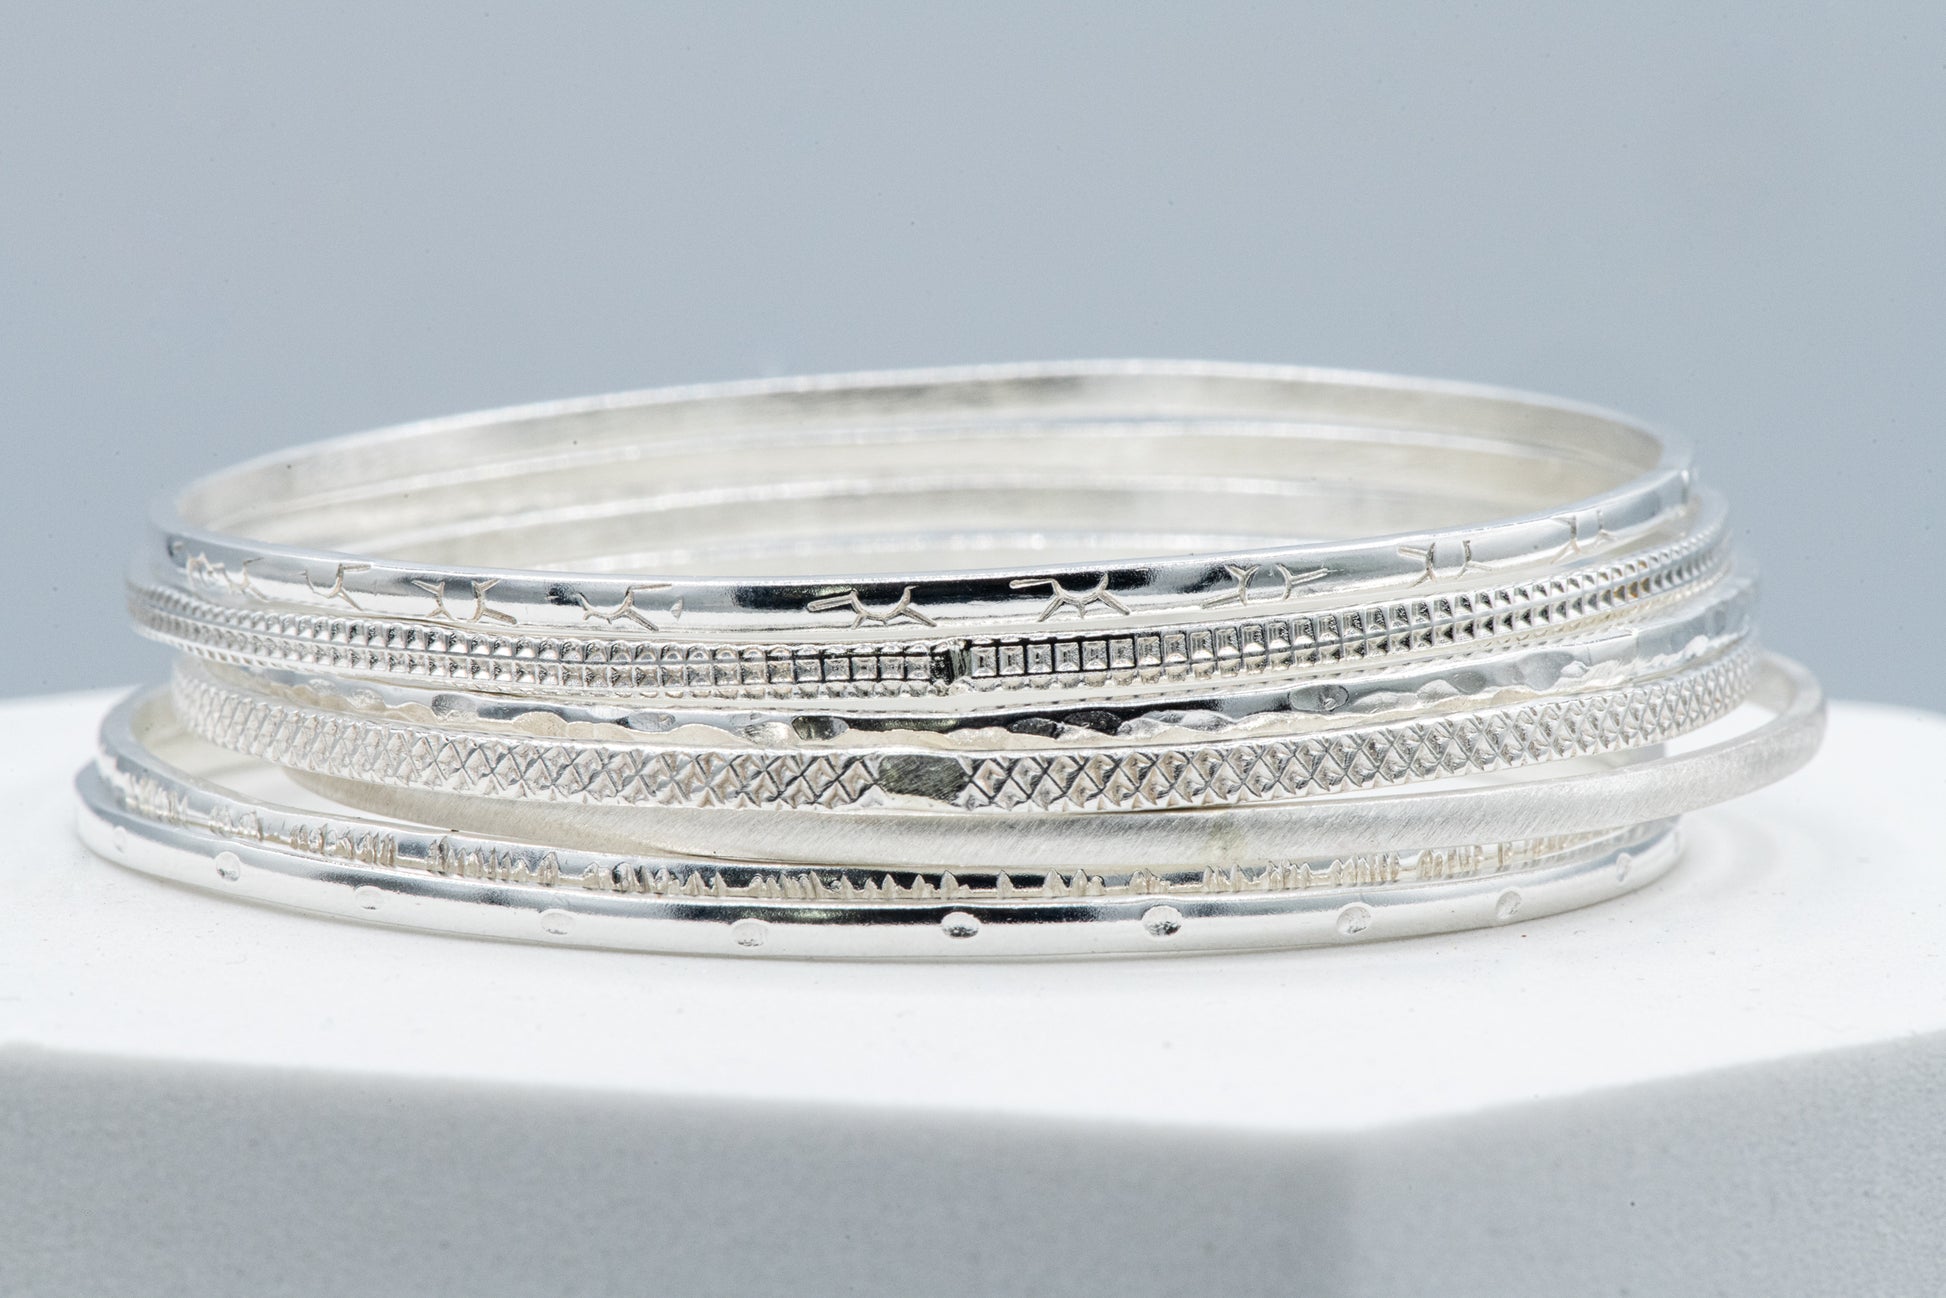 A set of seven handmade sterling silver bangles on top of a square.